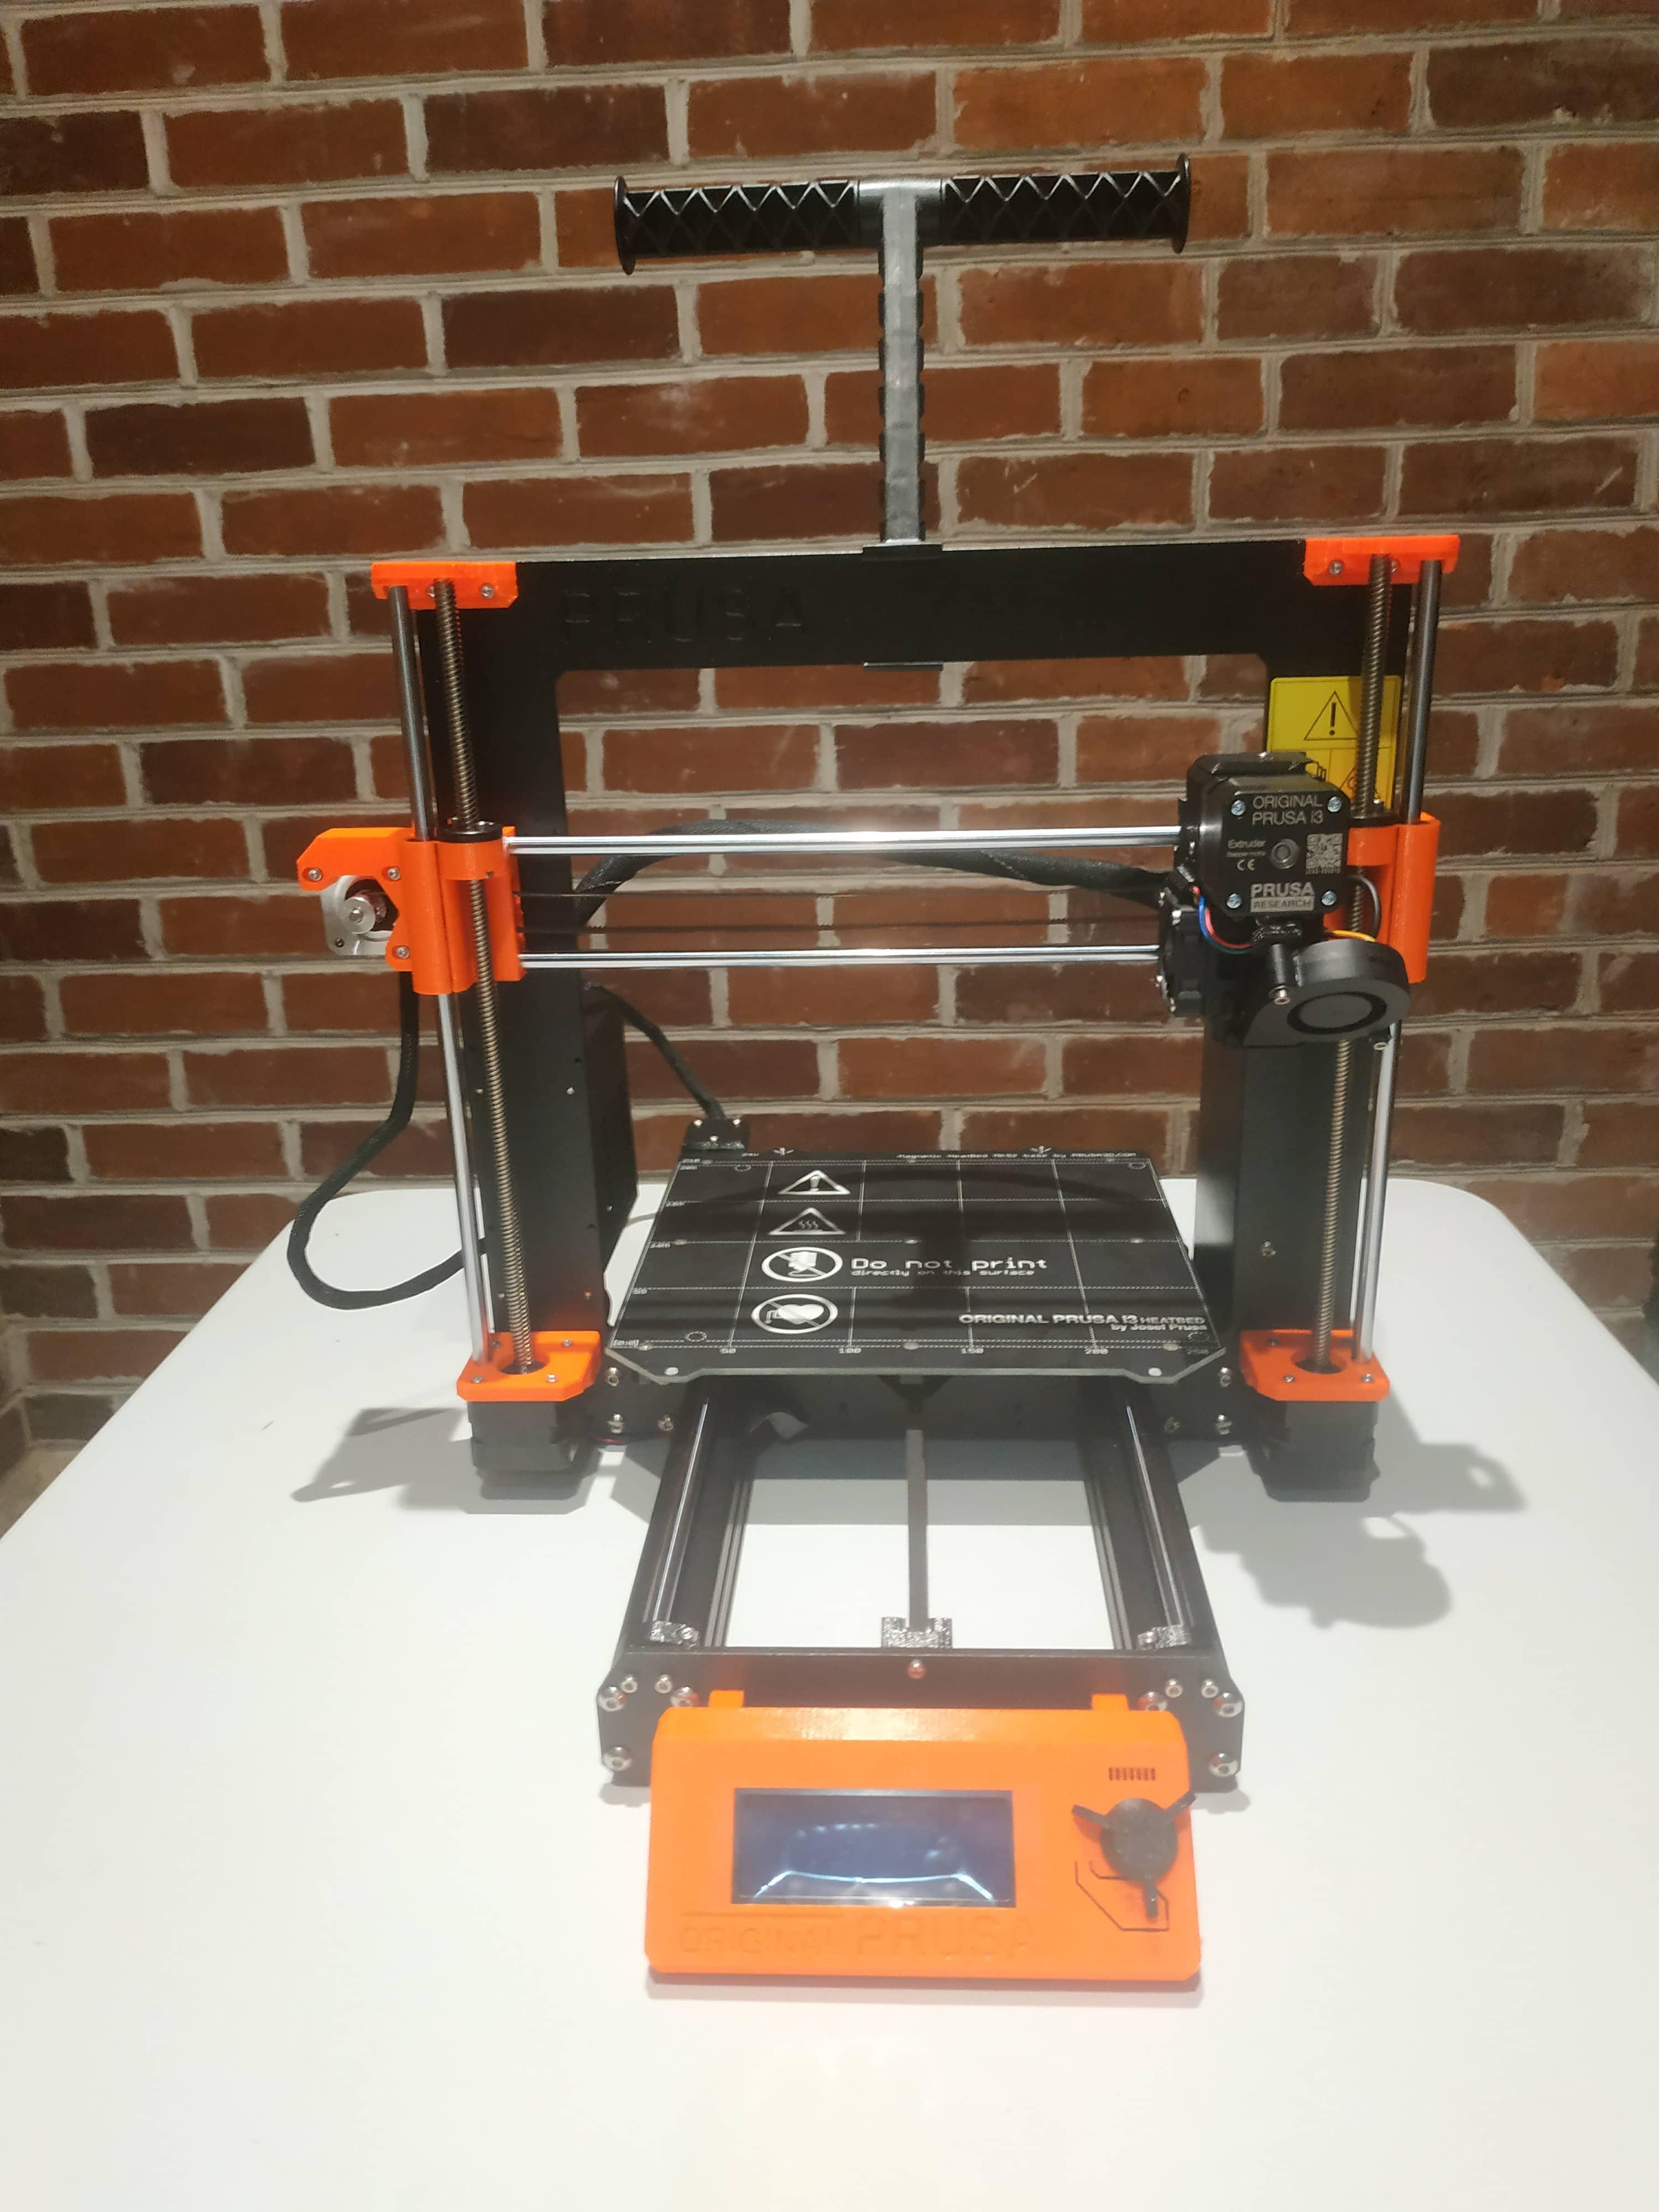 A Prusa brand 3D printer, sporting a black rectangular frame with orange accents